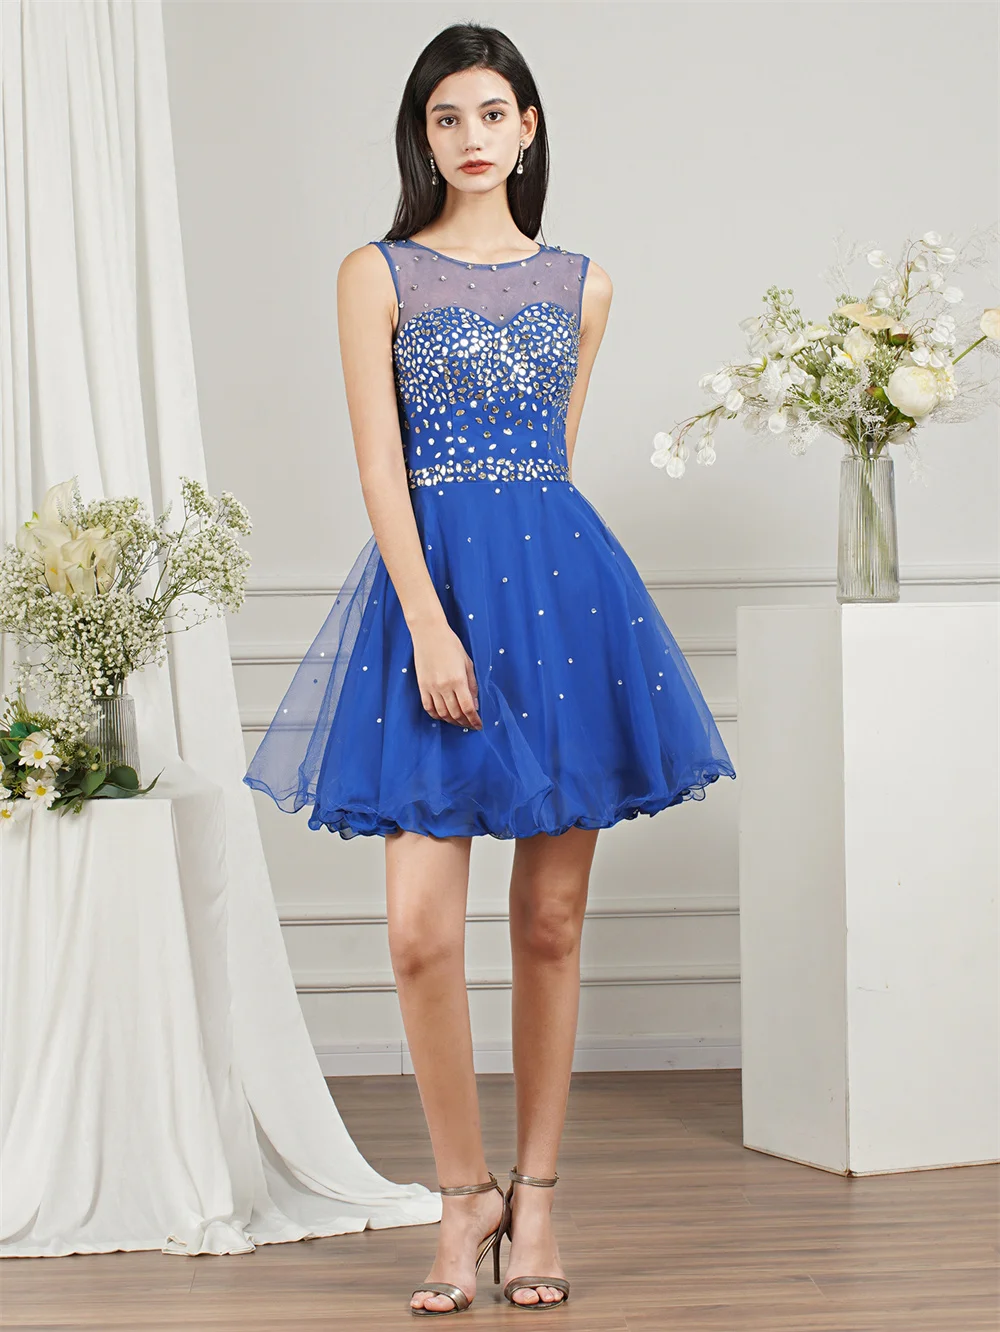 Navy and White Online Boutique Party Dress, Navy Juniors Cocktail